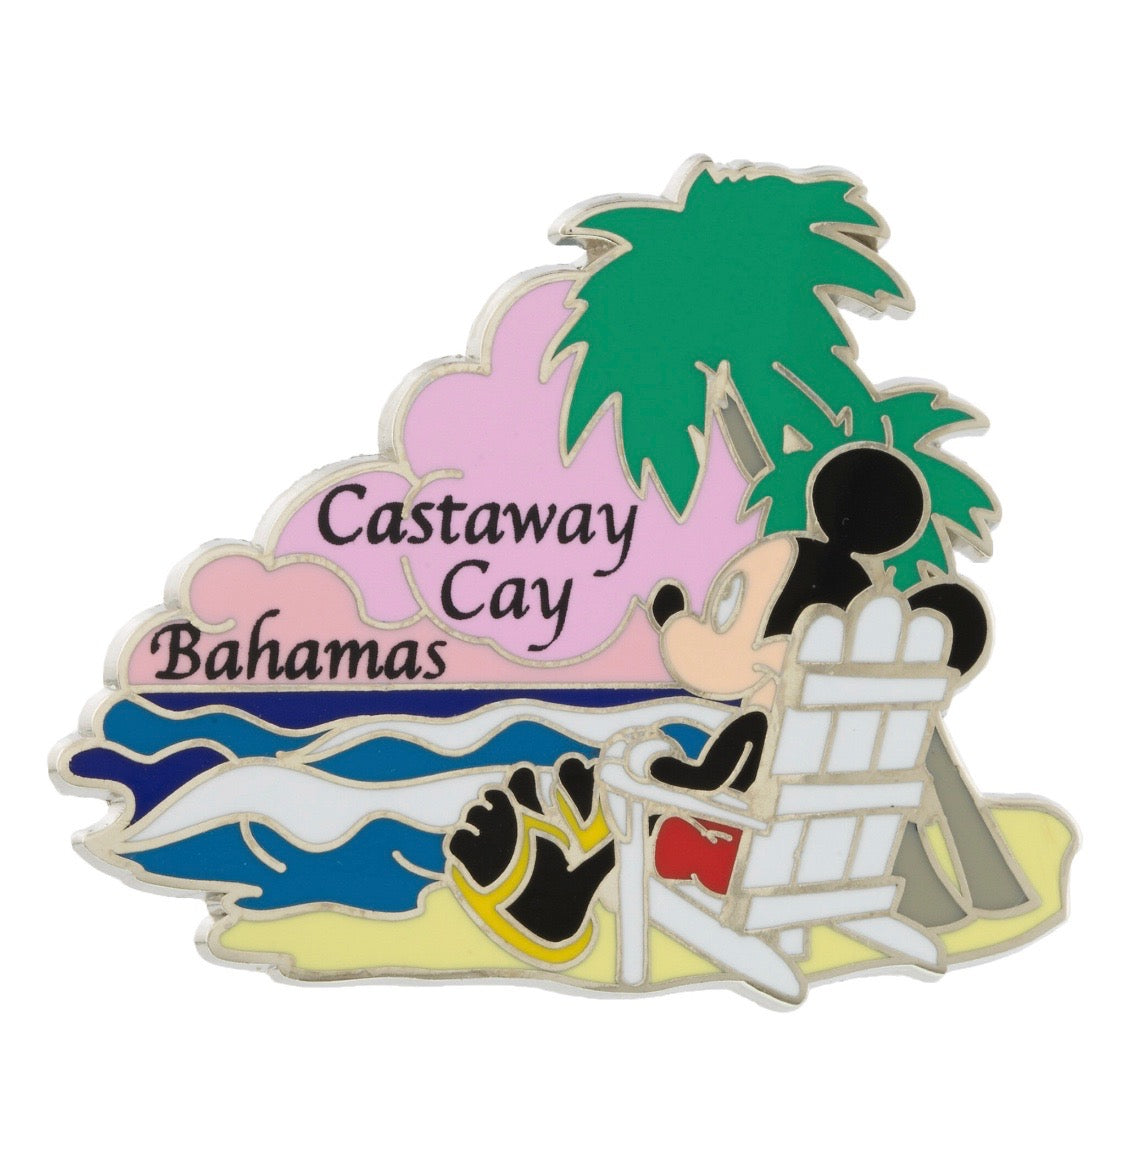 Disney Parks Cruise Line Mickey Mouse Castaway Cay Bahamas Pin New with Card